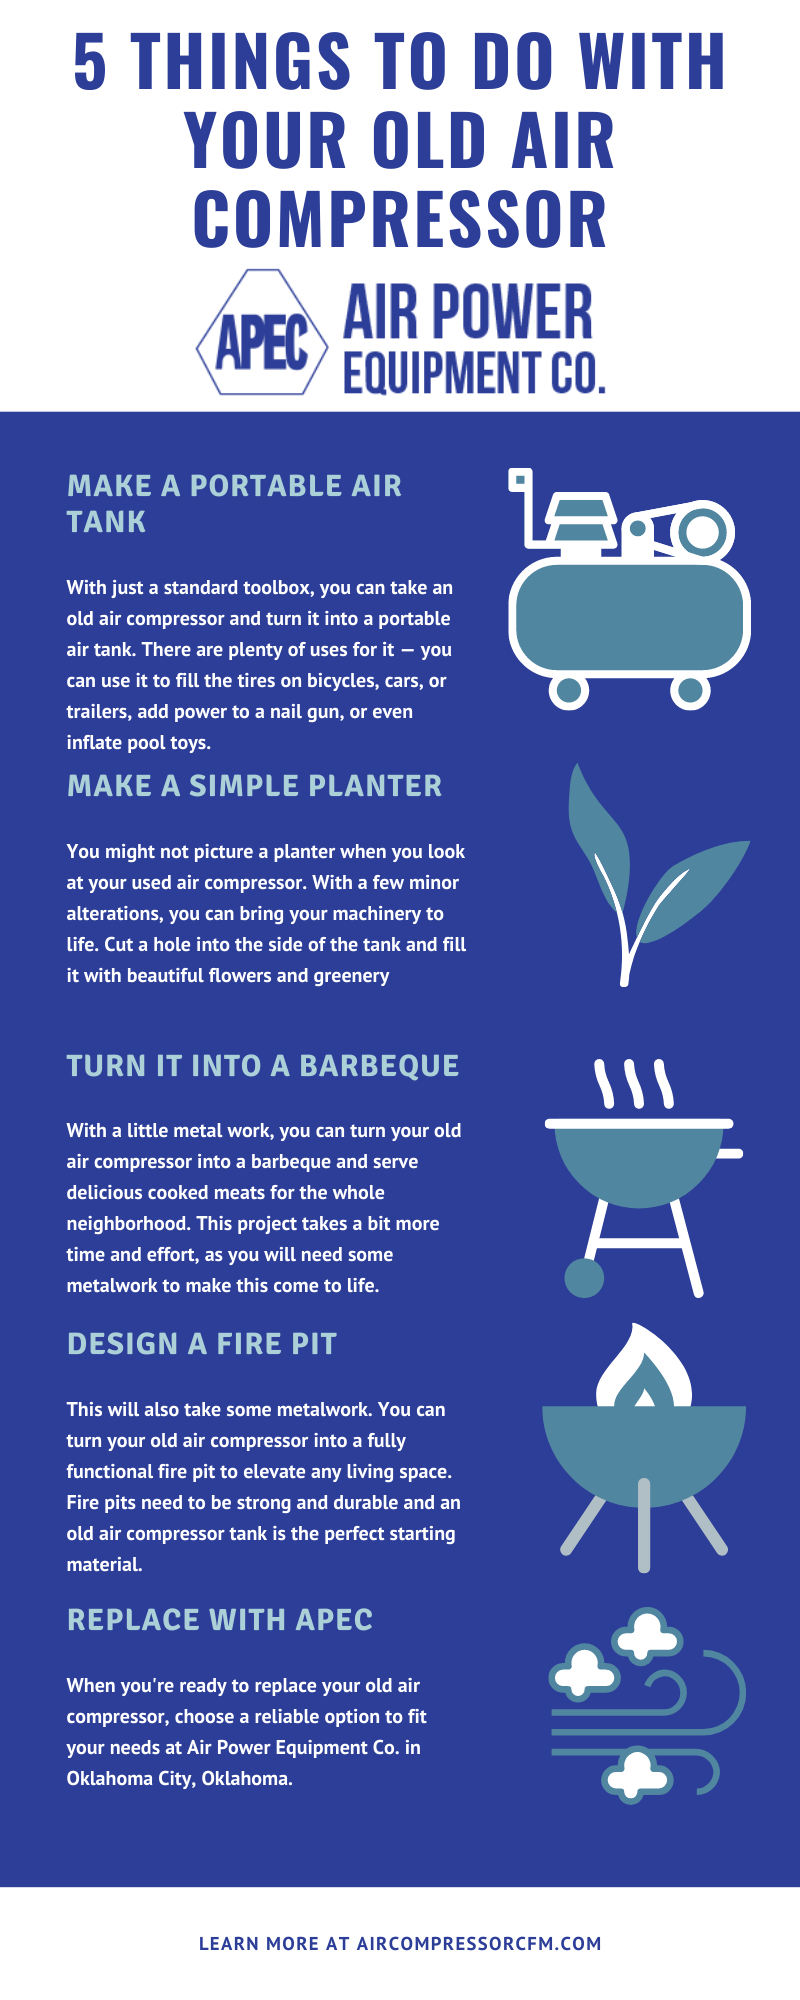 5 Things to do with your old air compressor infographic